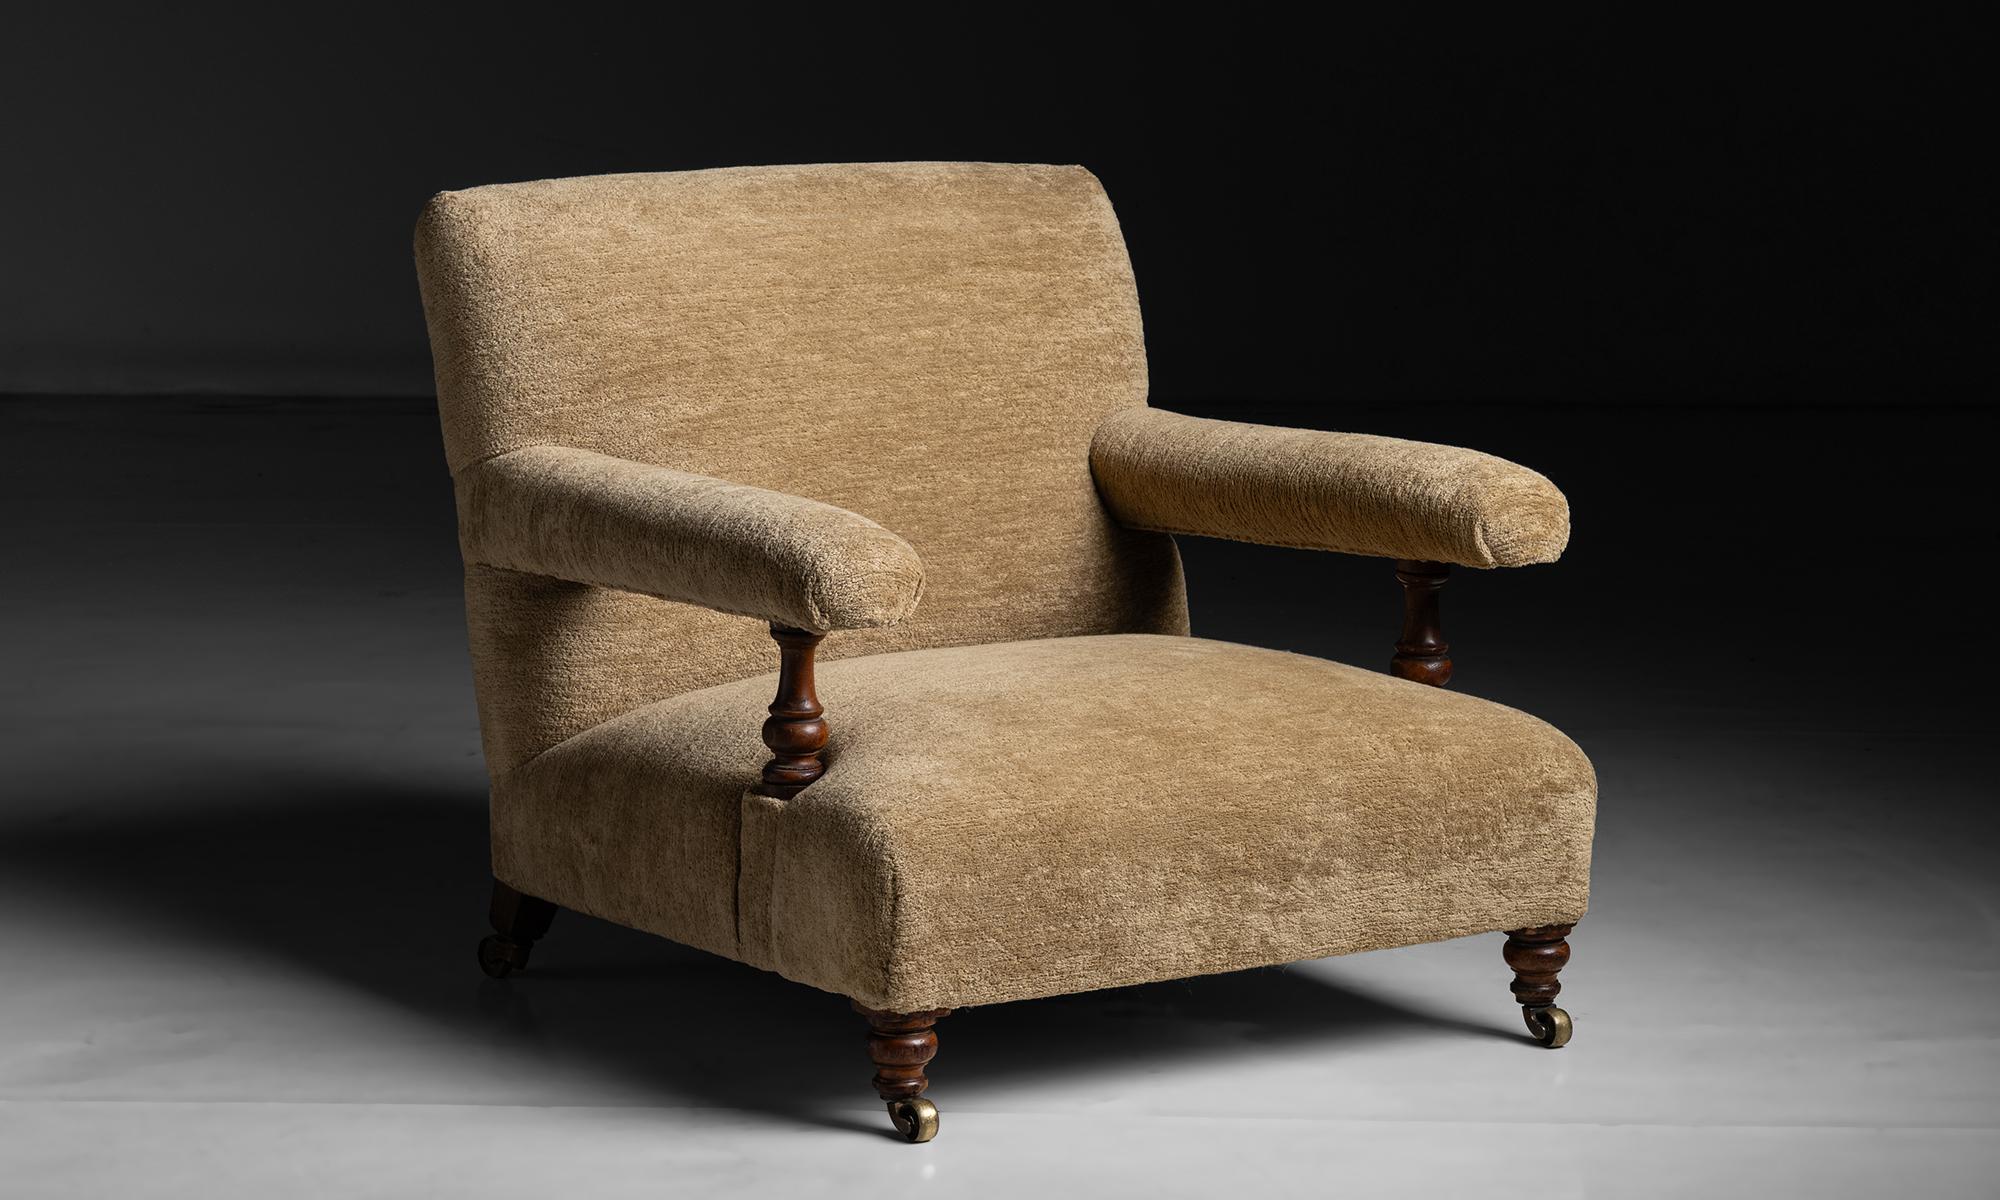 Howard & Sons Open Armchair in Chenille by Pierre Frey

England circa 1850

Low profile, Newly reupholstered.

Measures 28